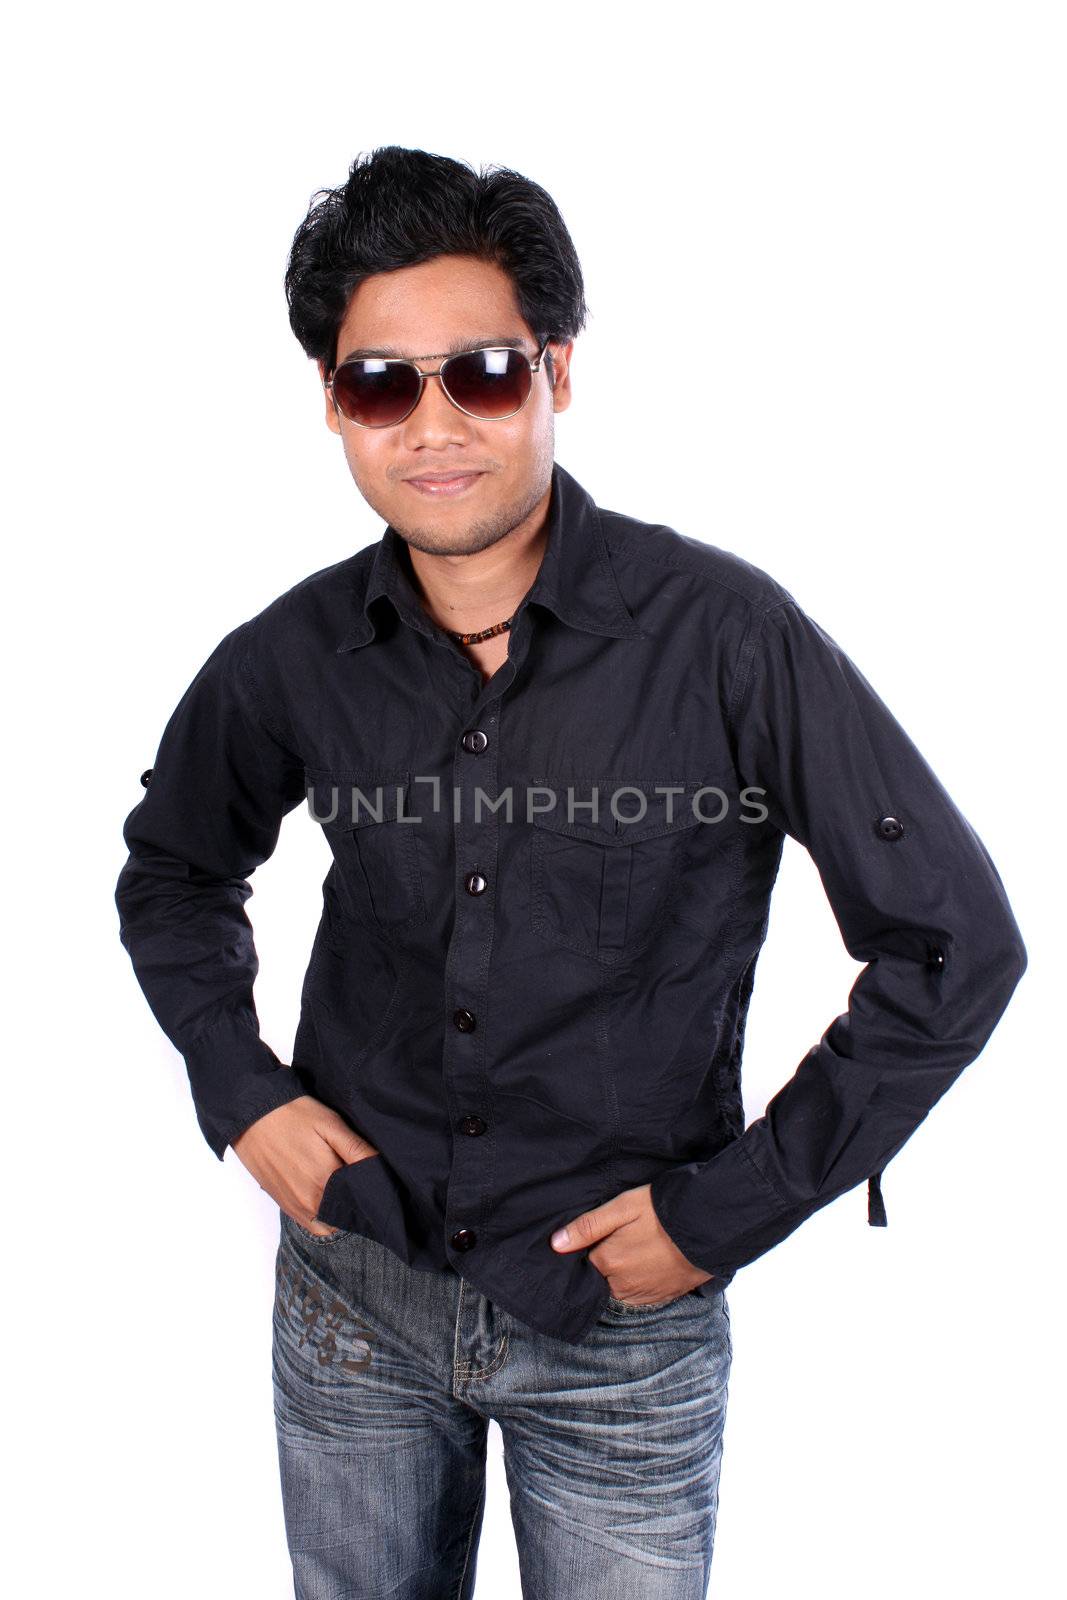 A young Indian man in black shirt wearing sunglasses, on white studio background.